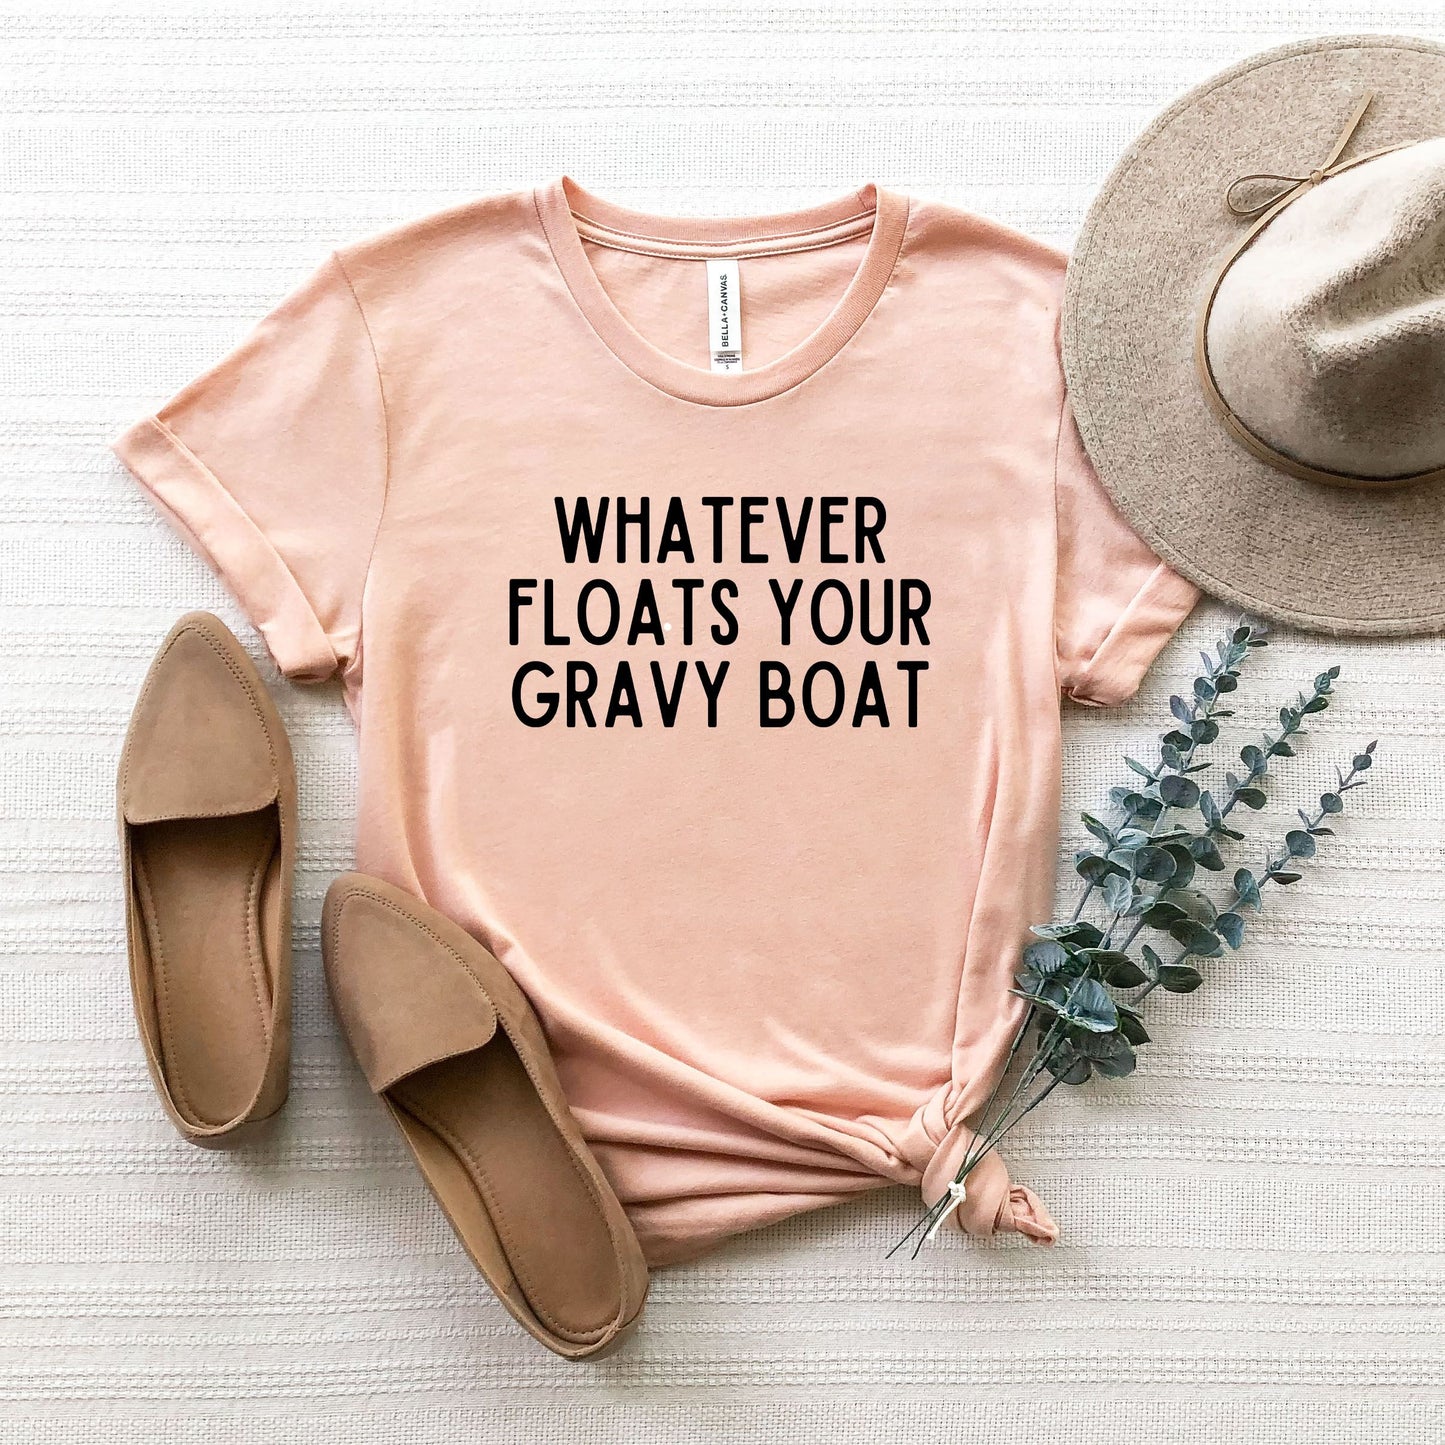 Whatever Floats Your Gravy Boat | Short Sleeve Graphic Tee